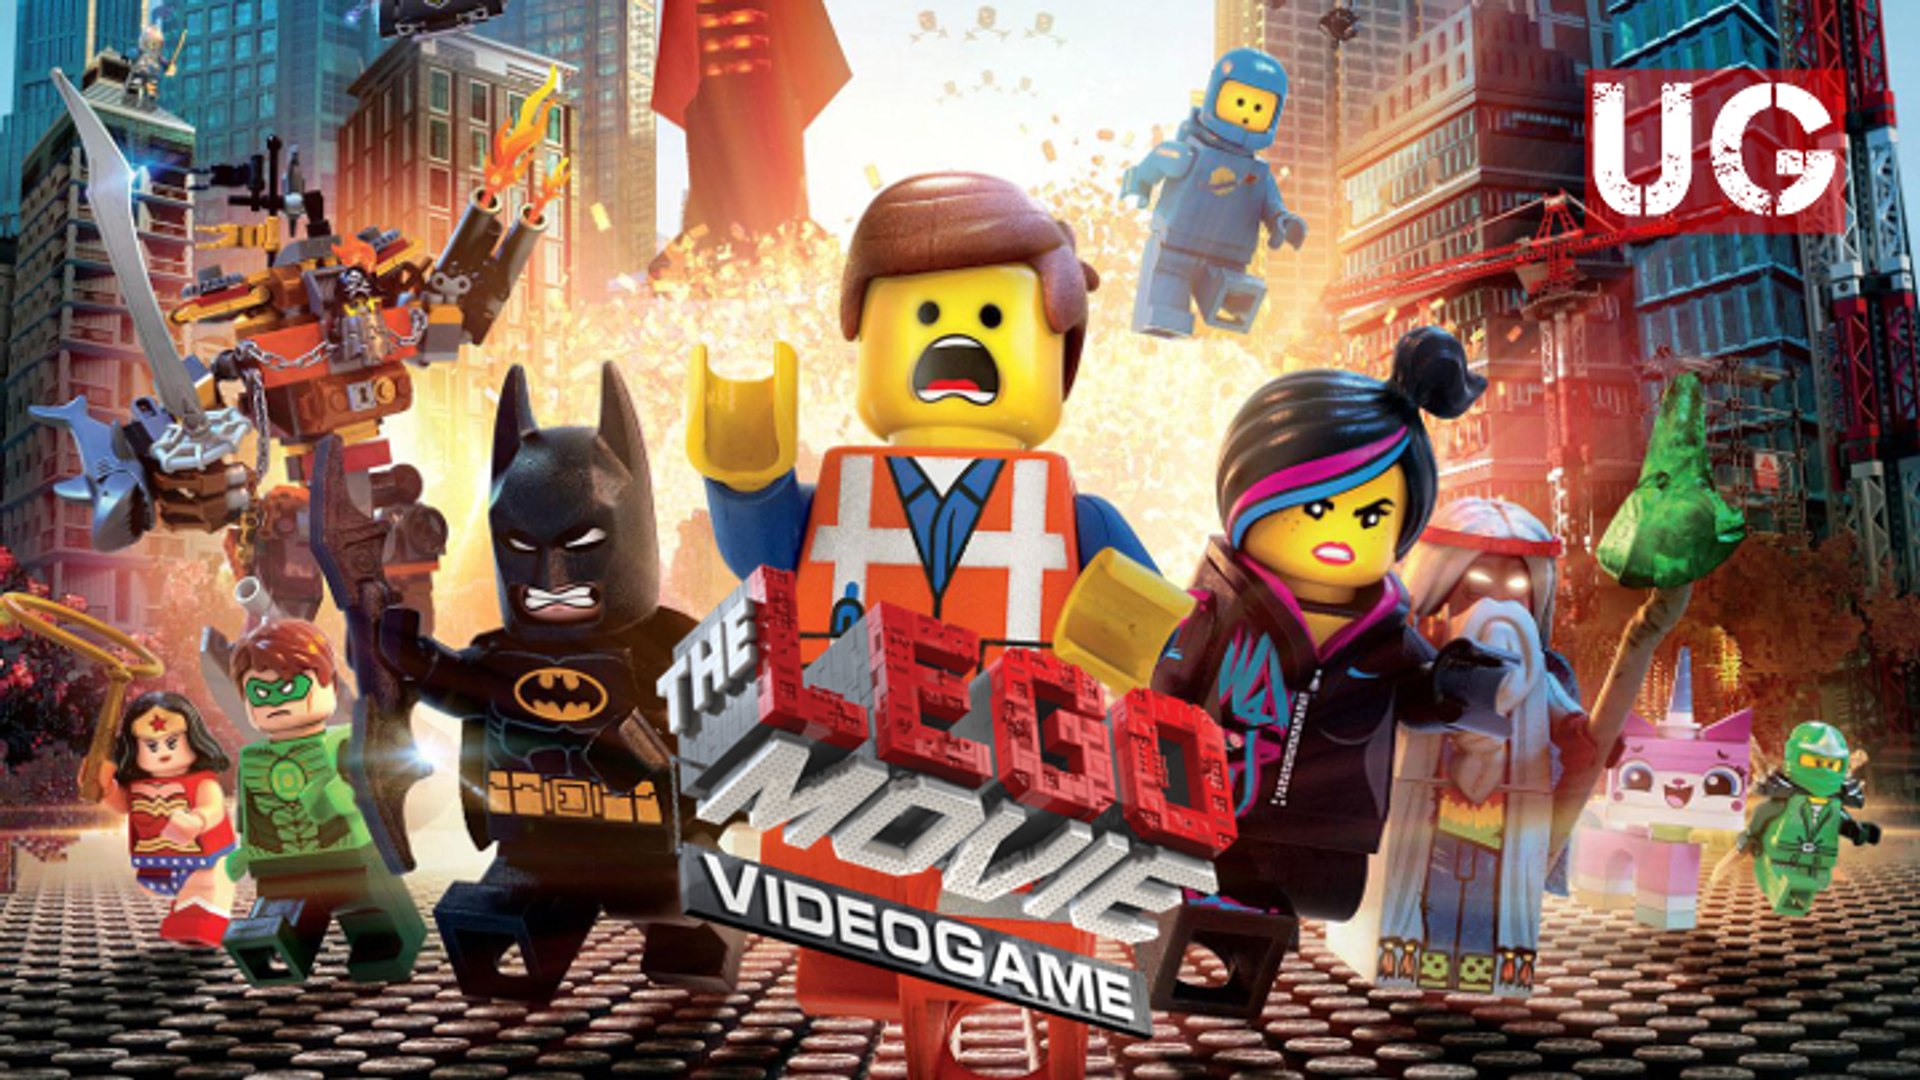 The Lego Movie Videogame - Grrg! Trophy/Achievement - video Dailymotion